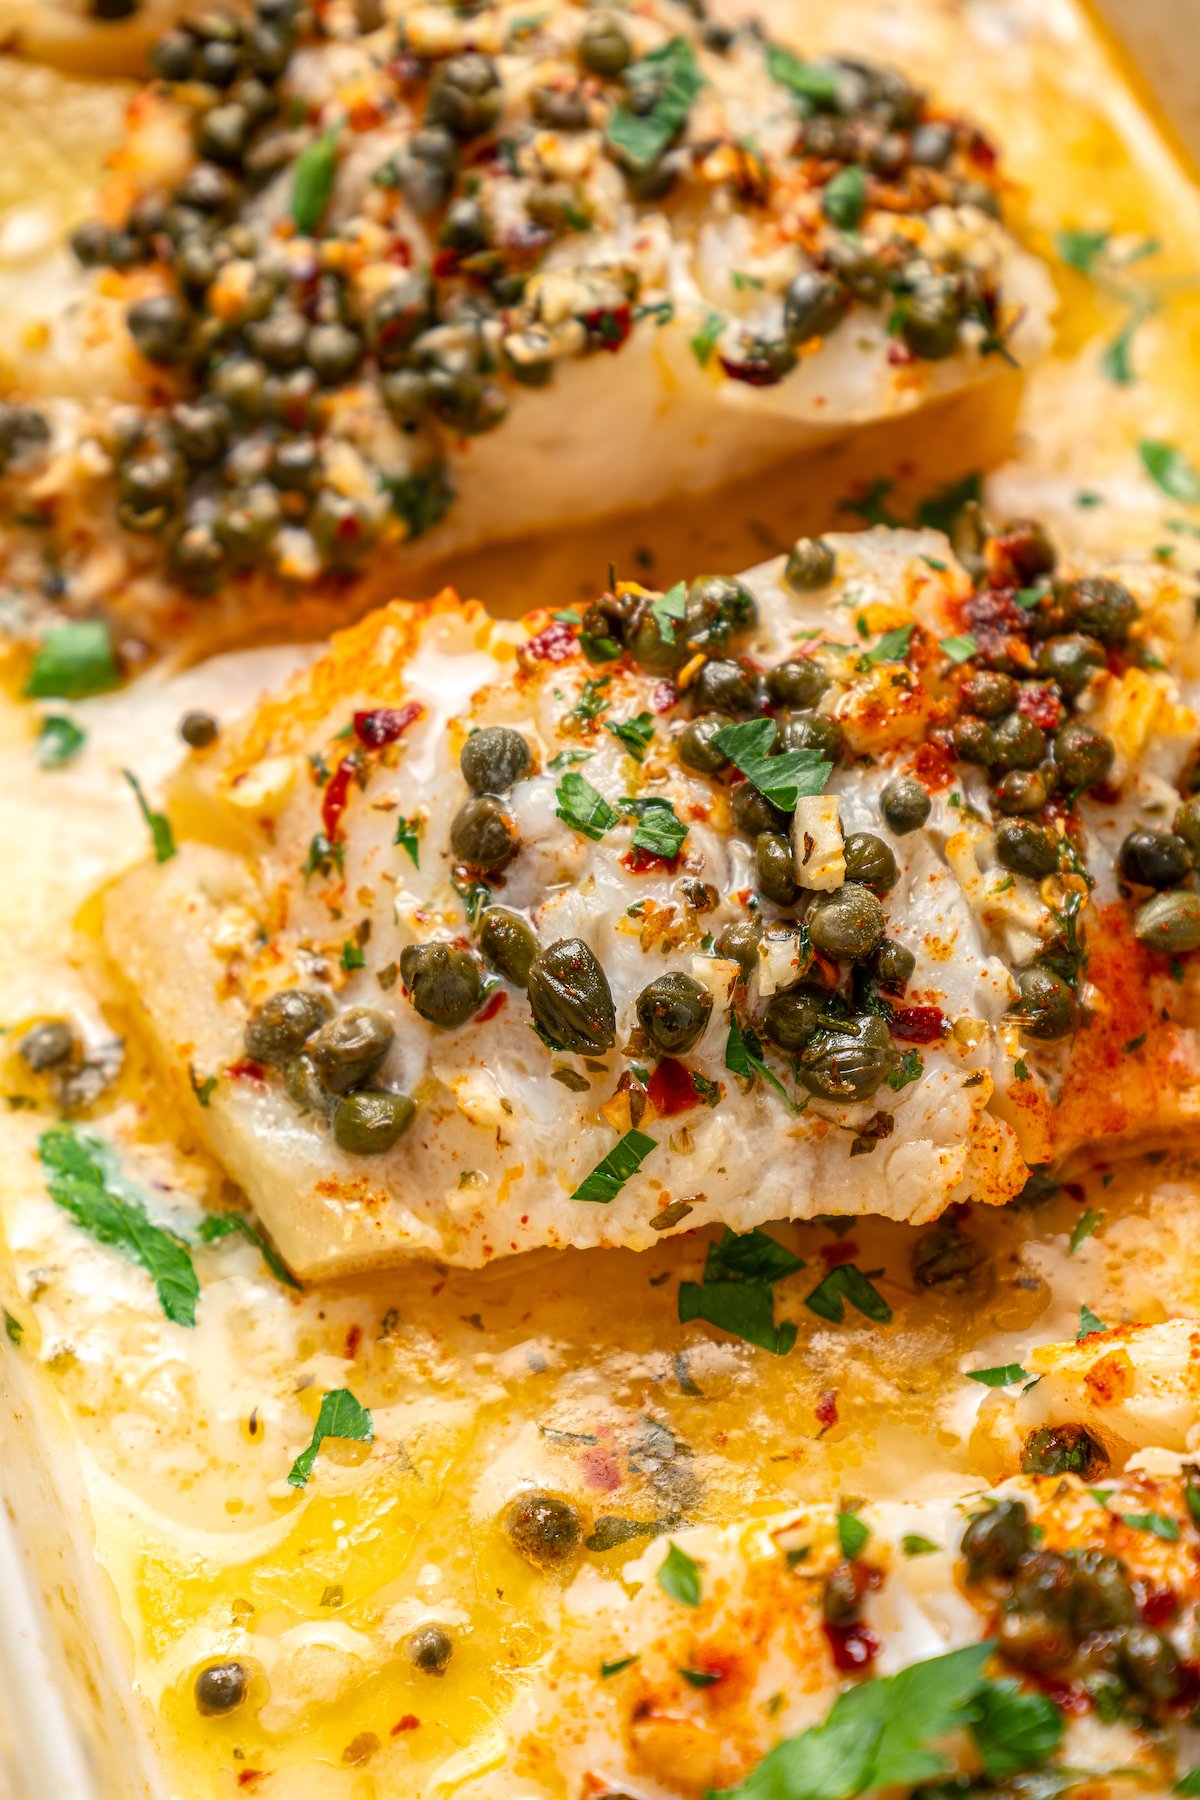 Garlic-herb-caper sauce baked with fish.